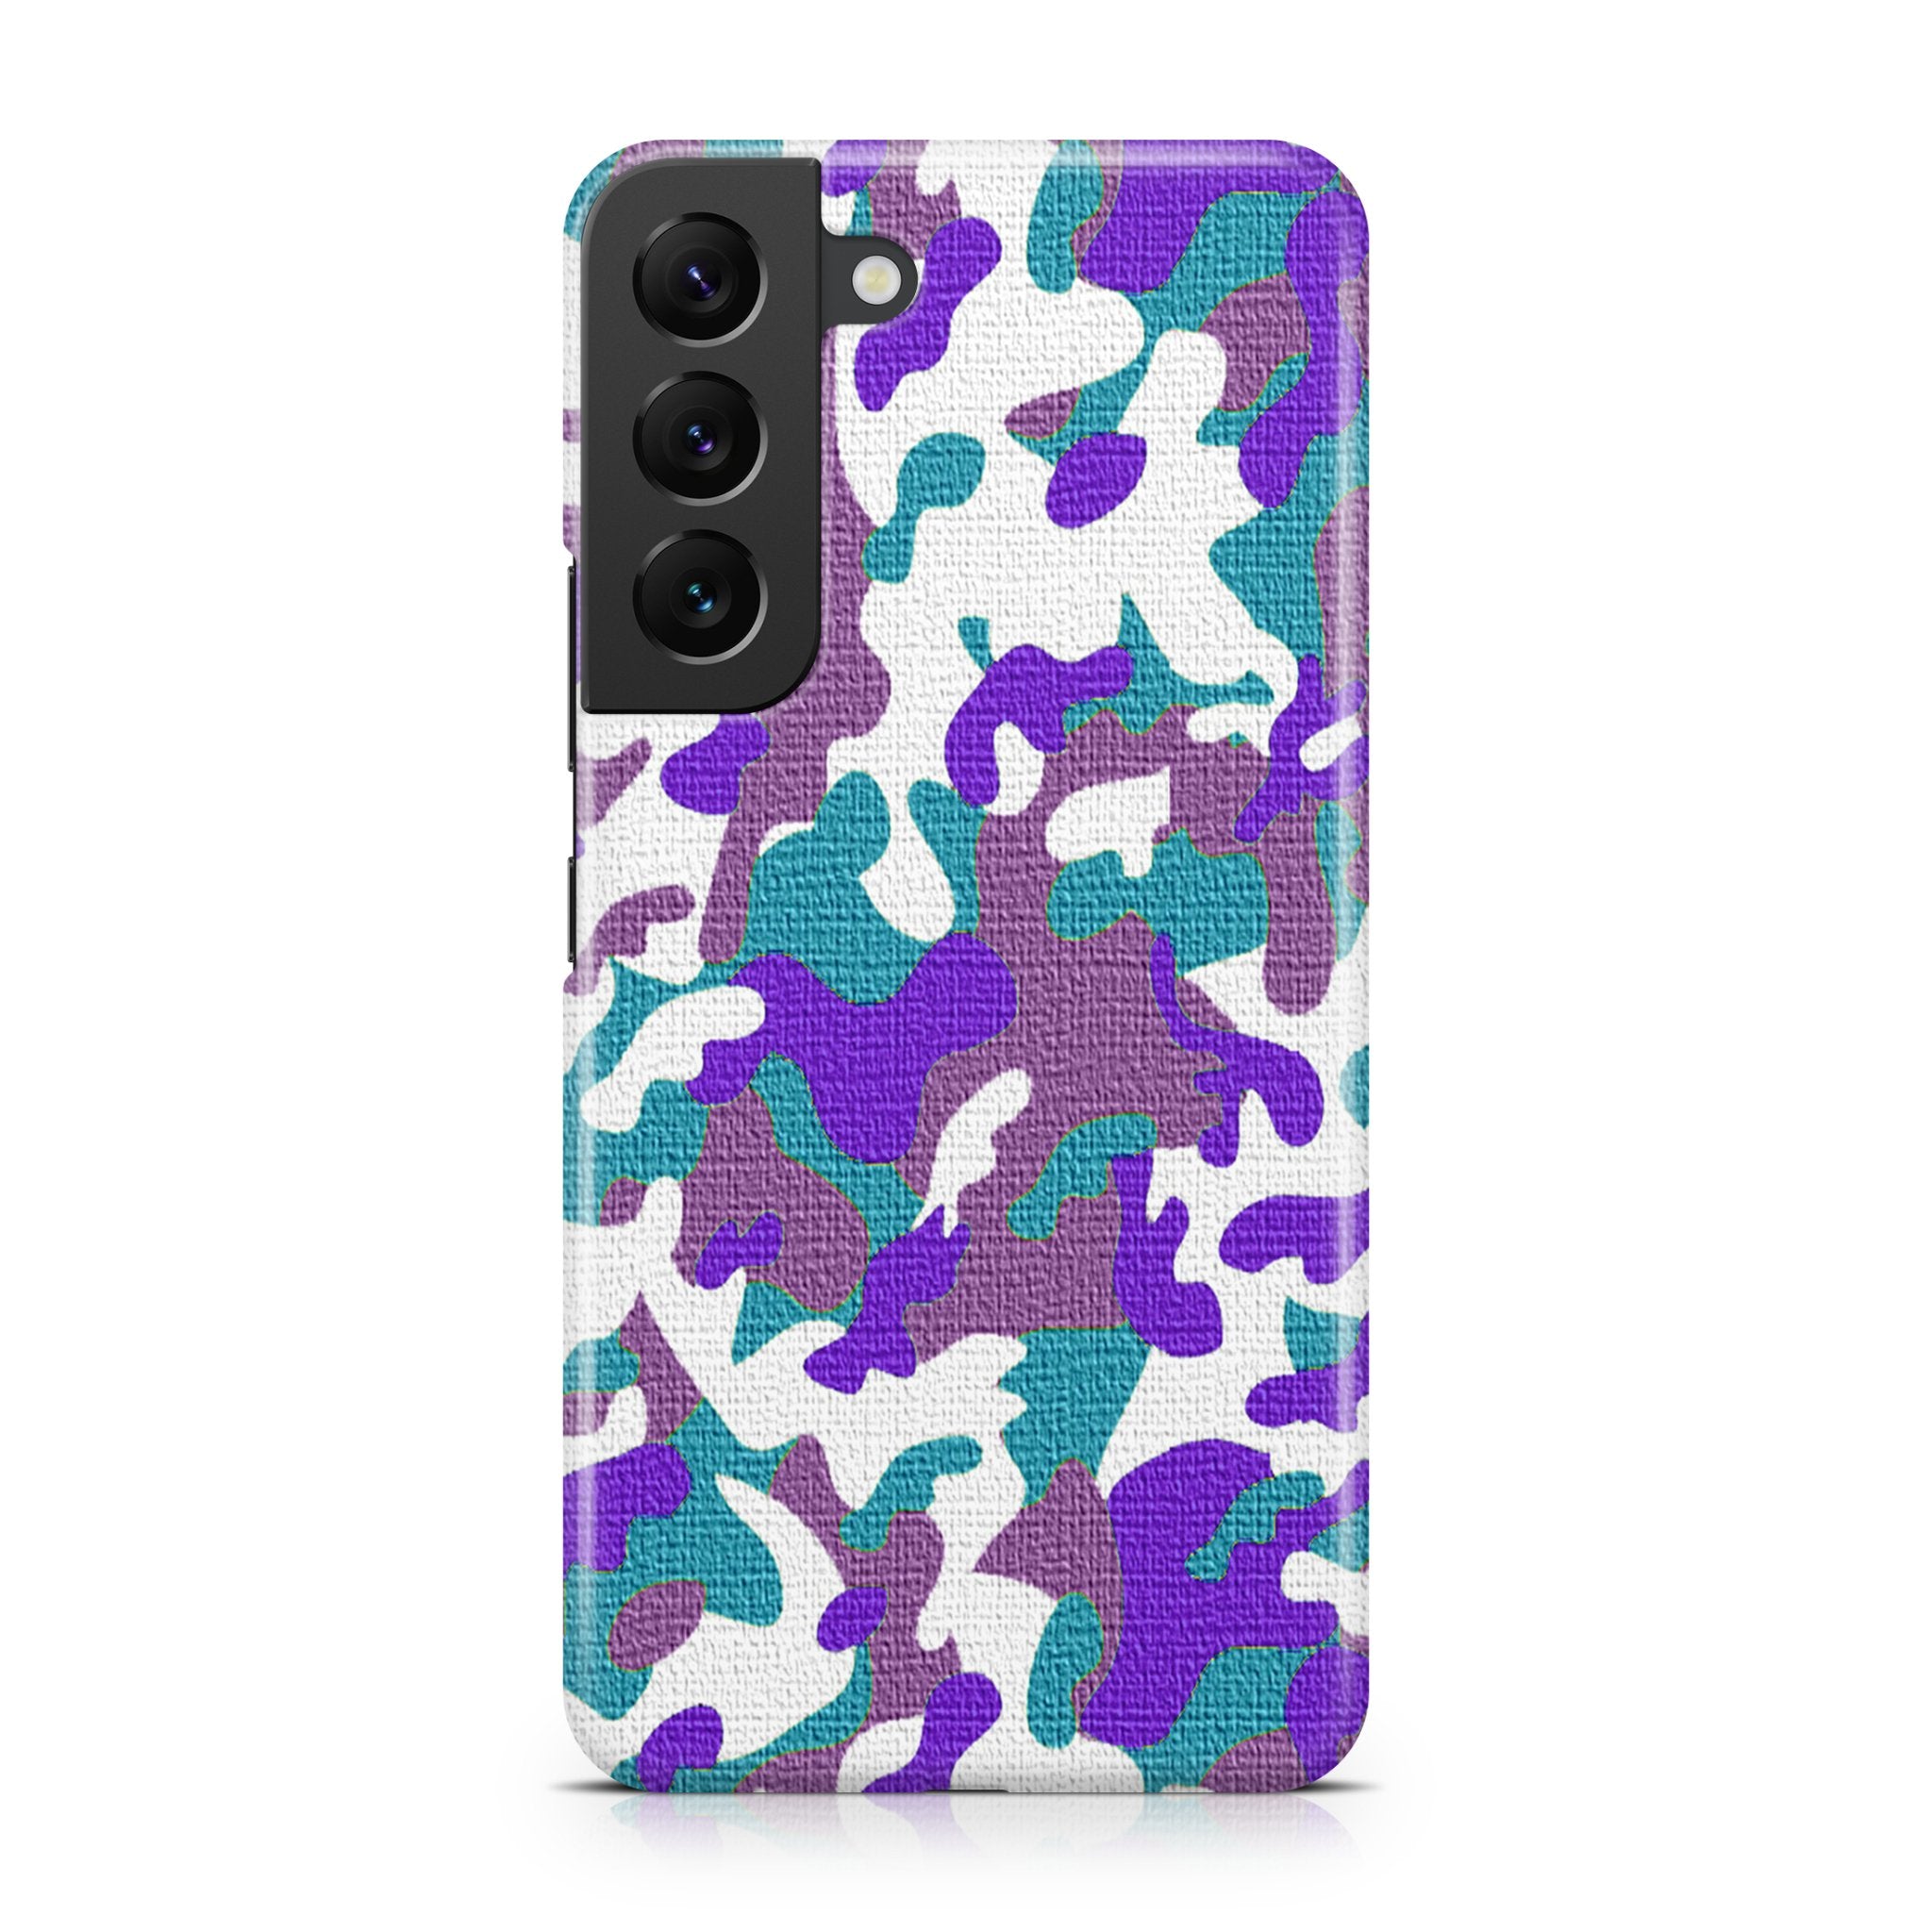 Purple Camo - Samsung phone case designs by CaseSwagger